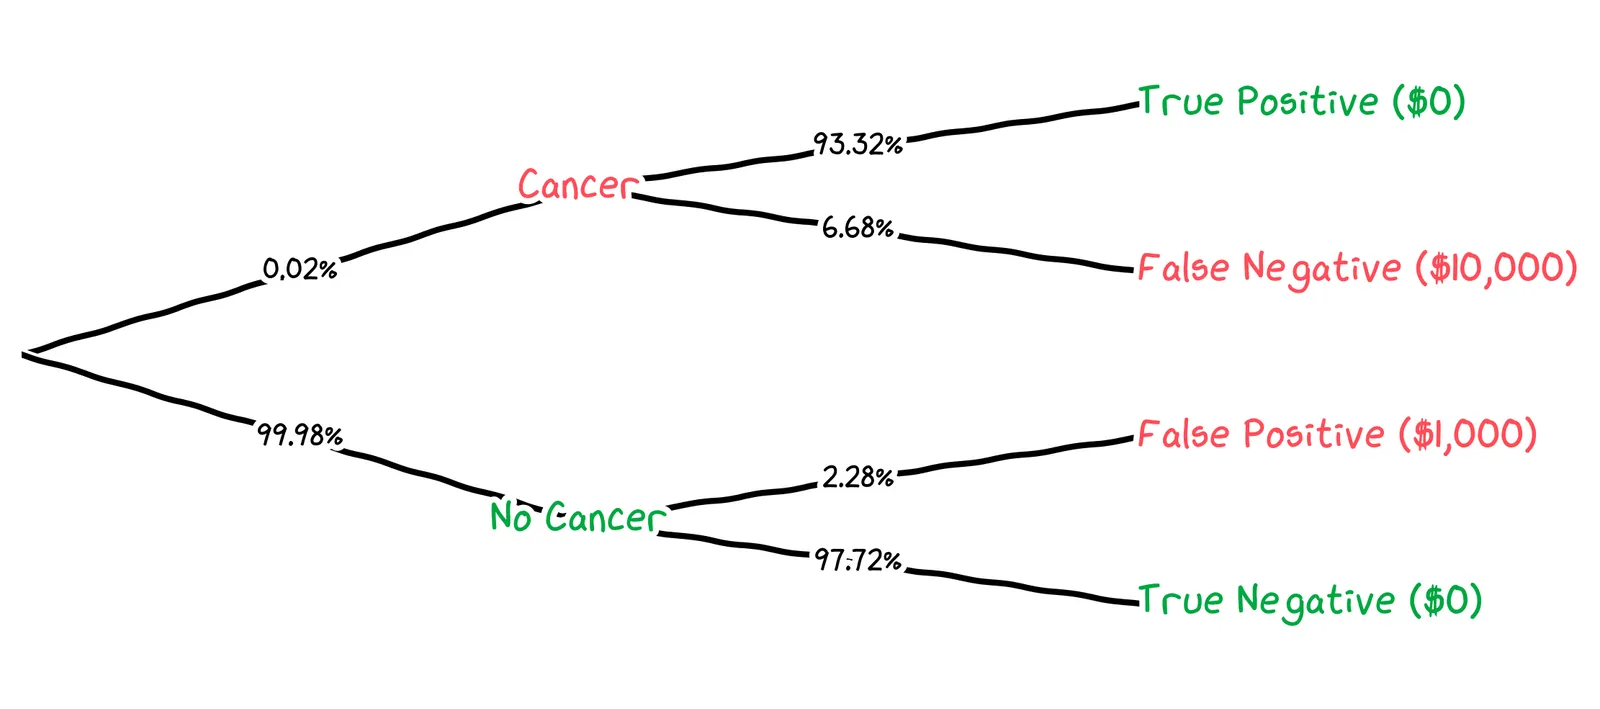 A tree of outcomes, with each probability calculated for a control limit of 1.4 ng/mL.